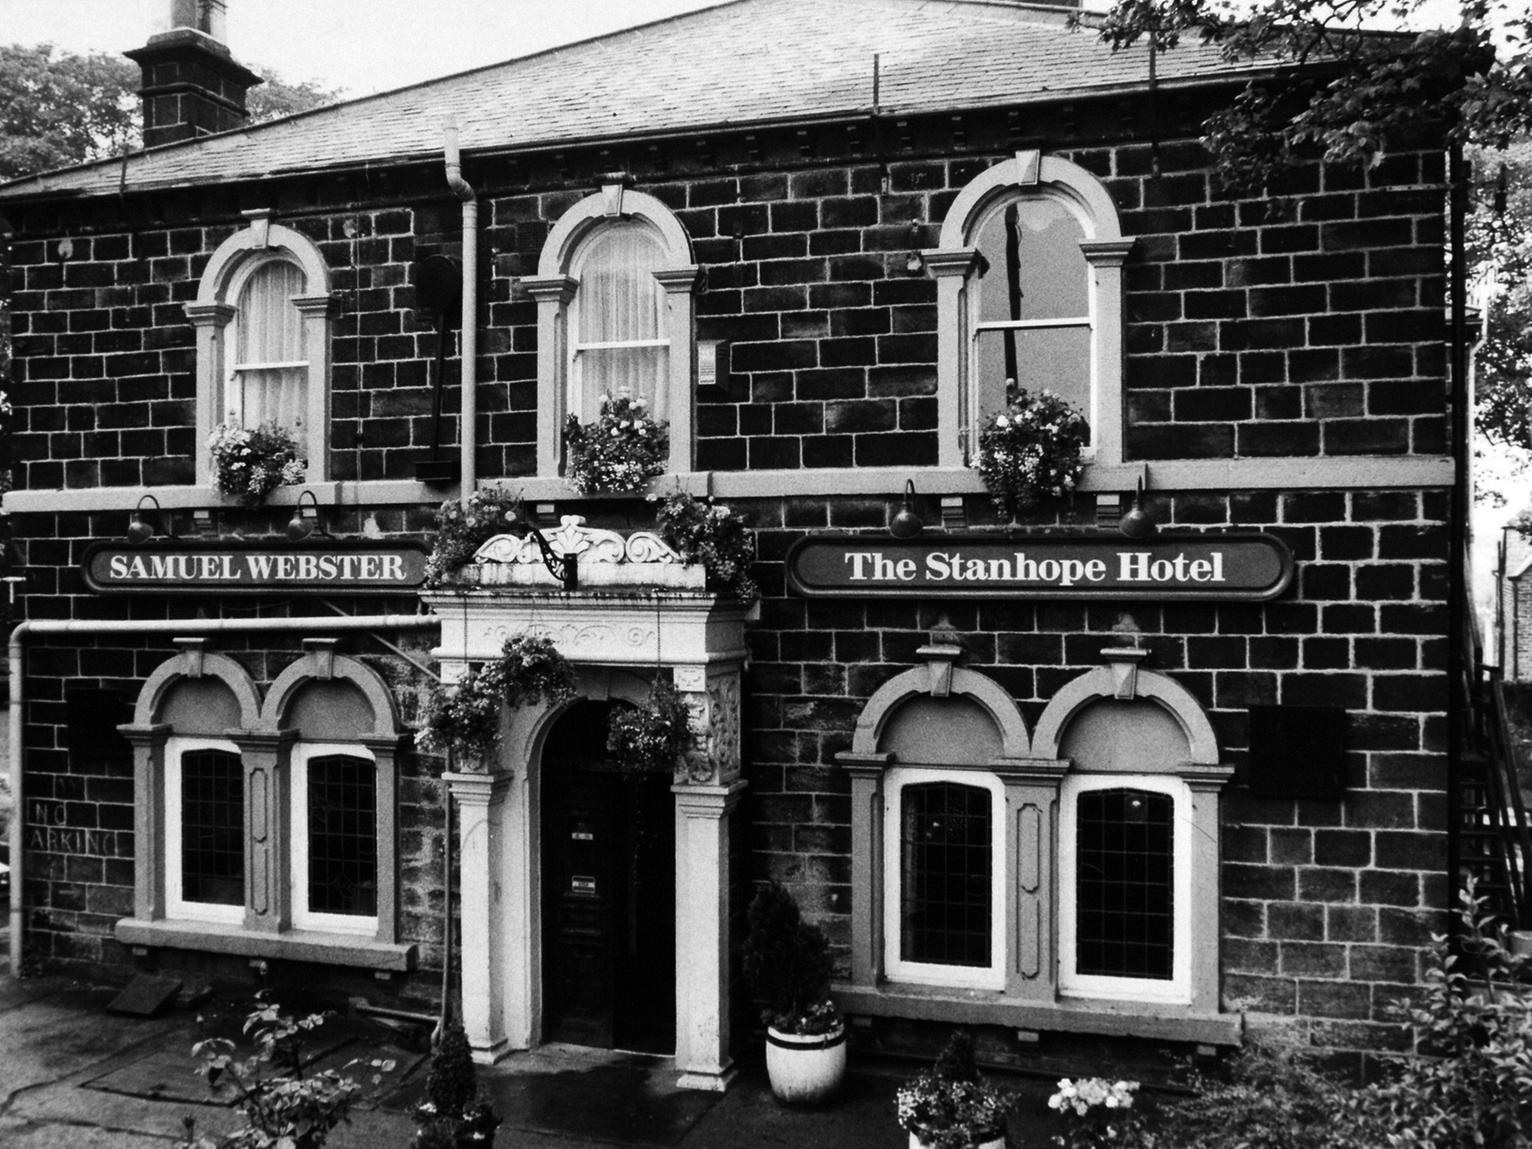 Did you enjoy a meal here back in the day? The Stanhope Hotel on Calverley Lane. Pictured in August 1985.